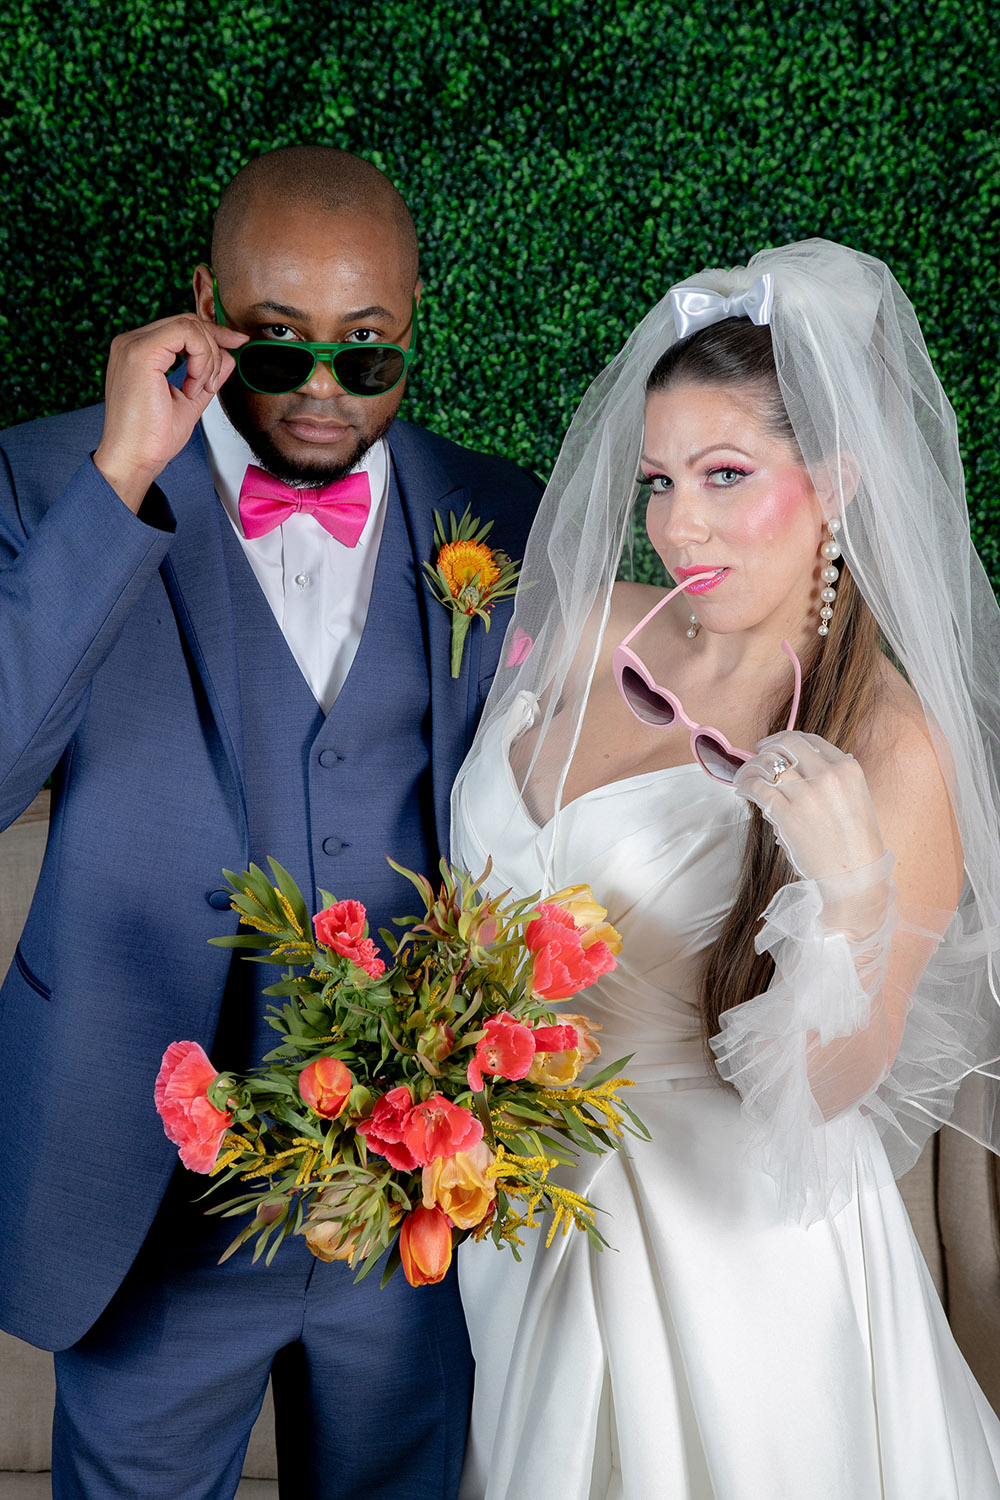 bride and groom with sunglasses